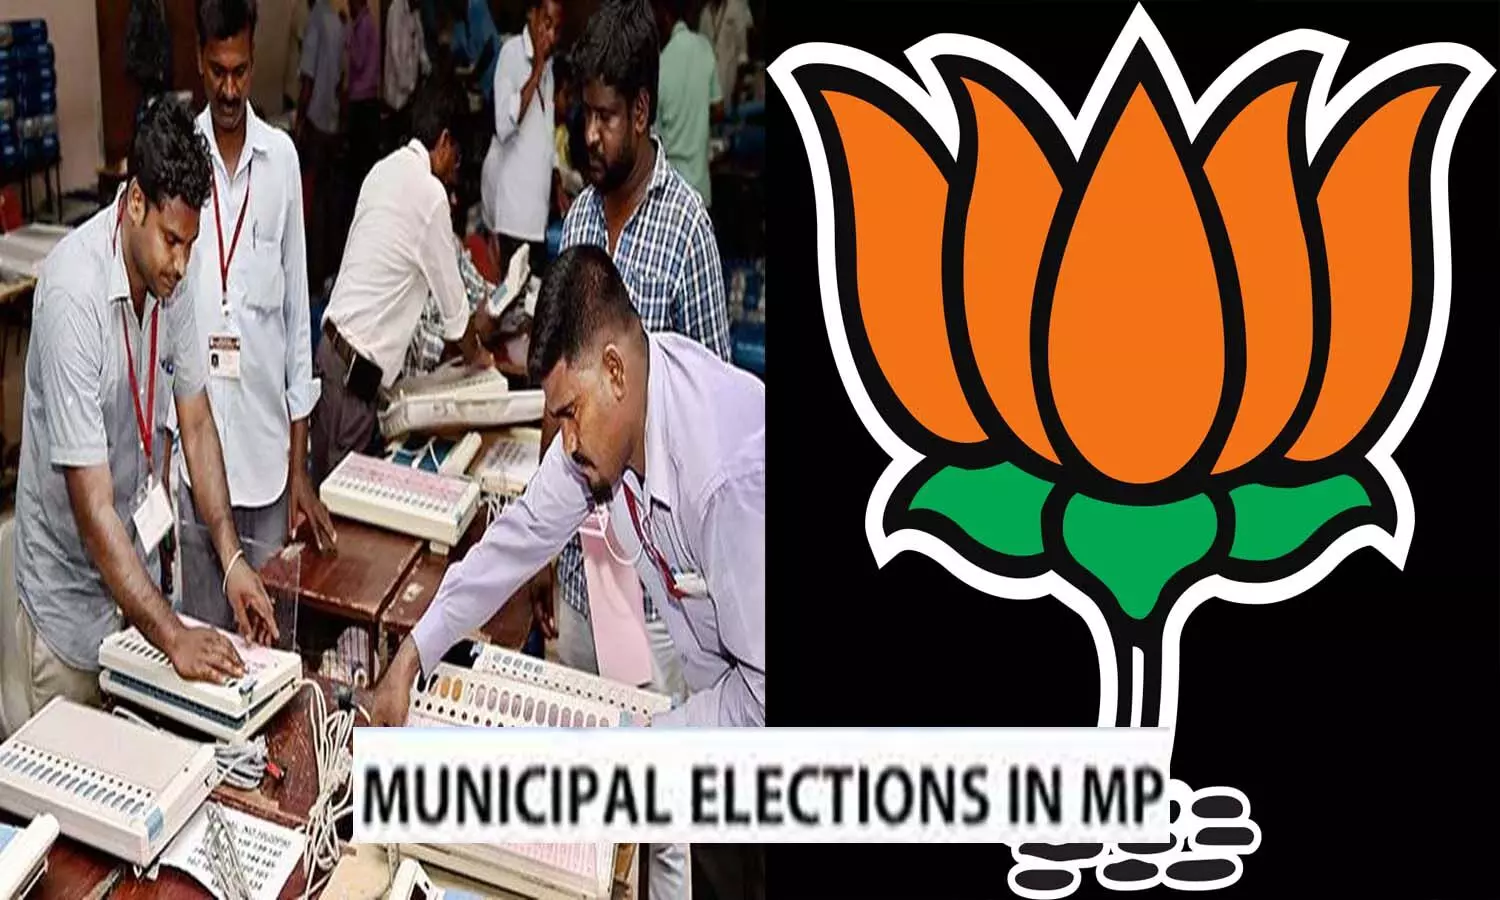 BJP announces mayor candidates for municipal elections in Madhya Pradesh, announced on 13 seats, decision on 3 pending